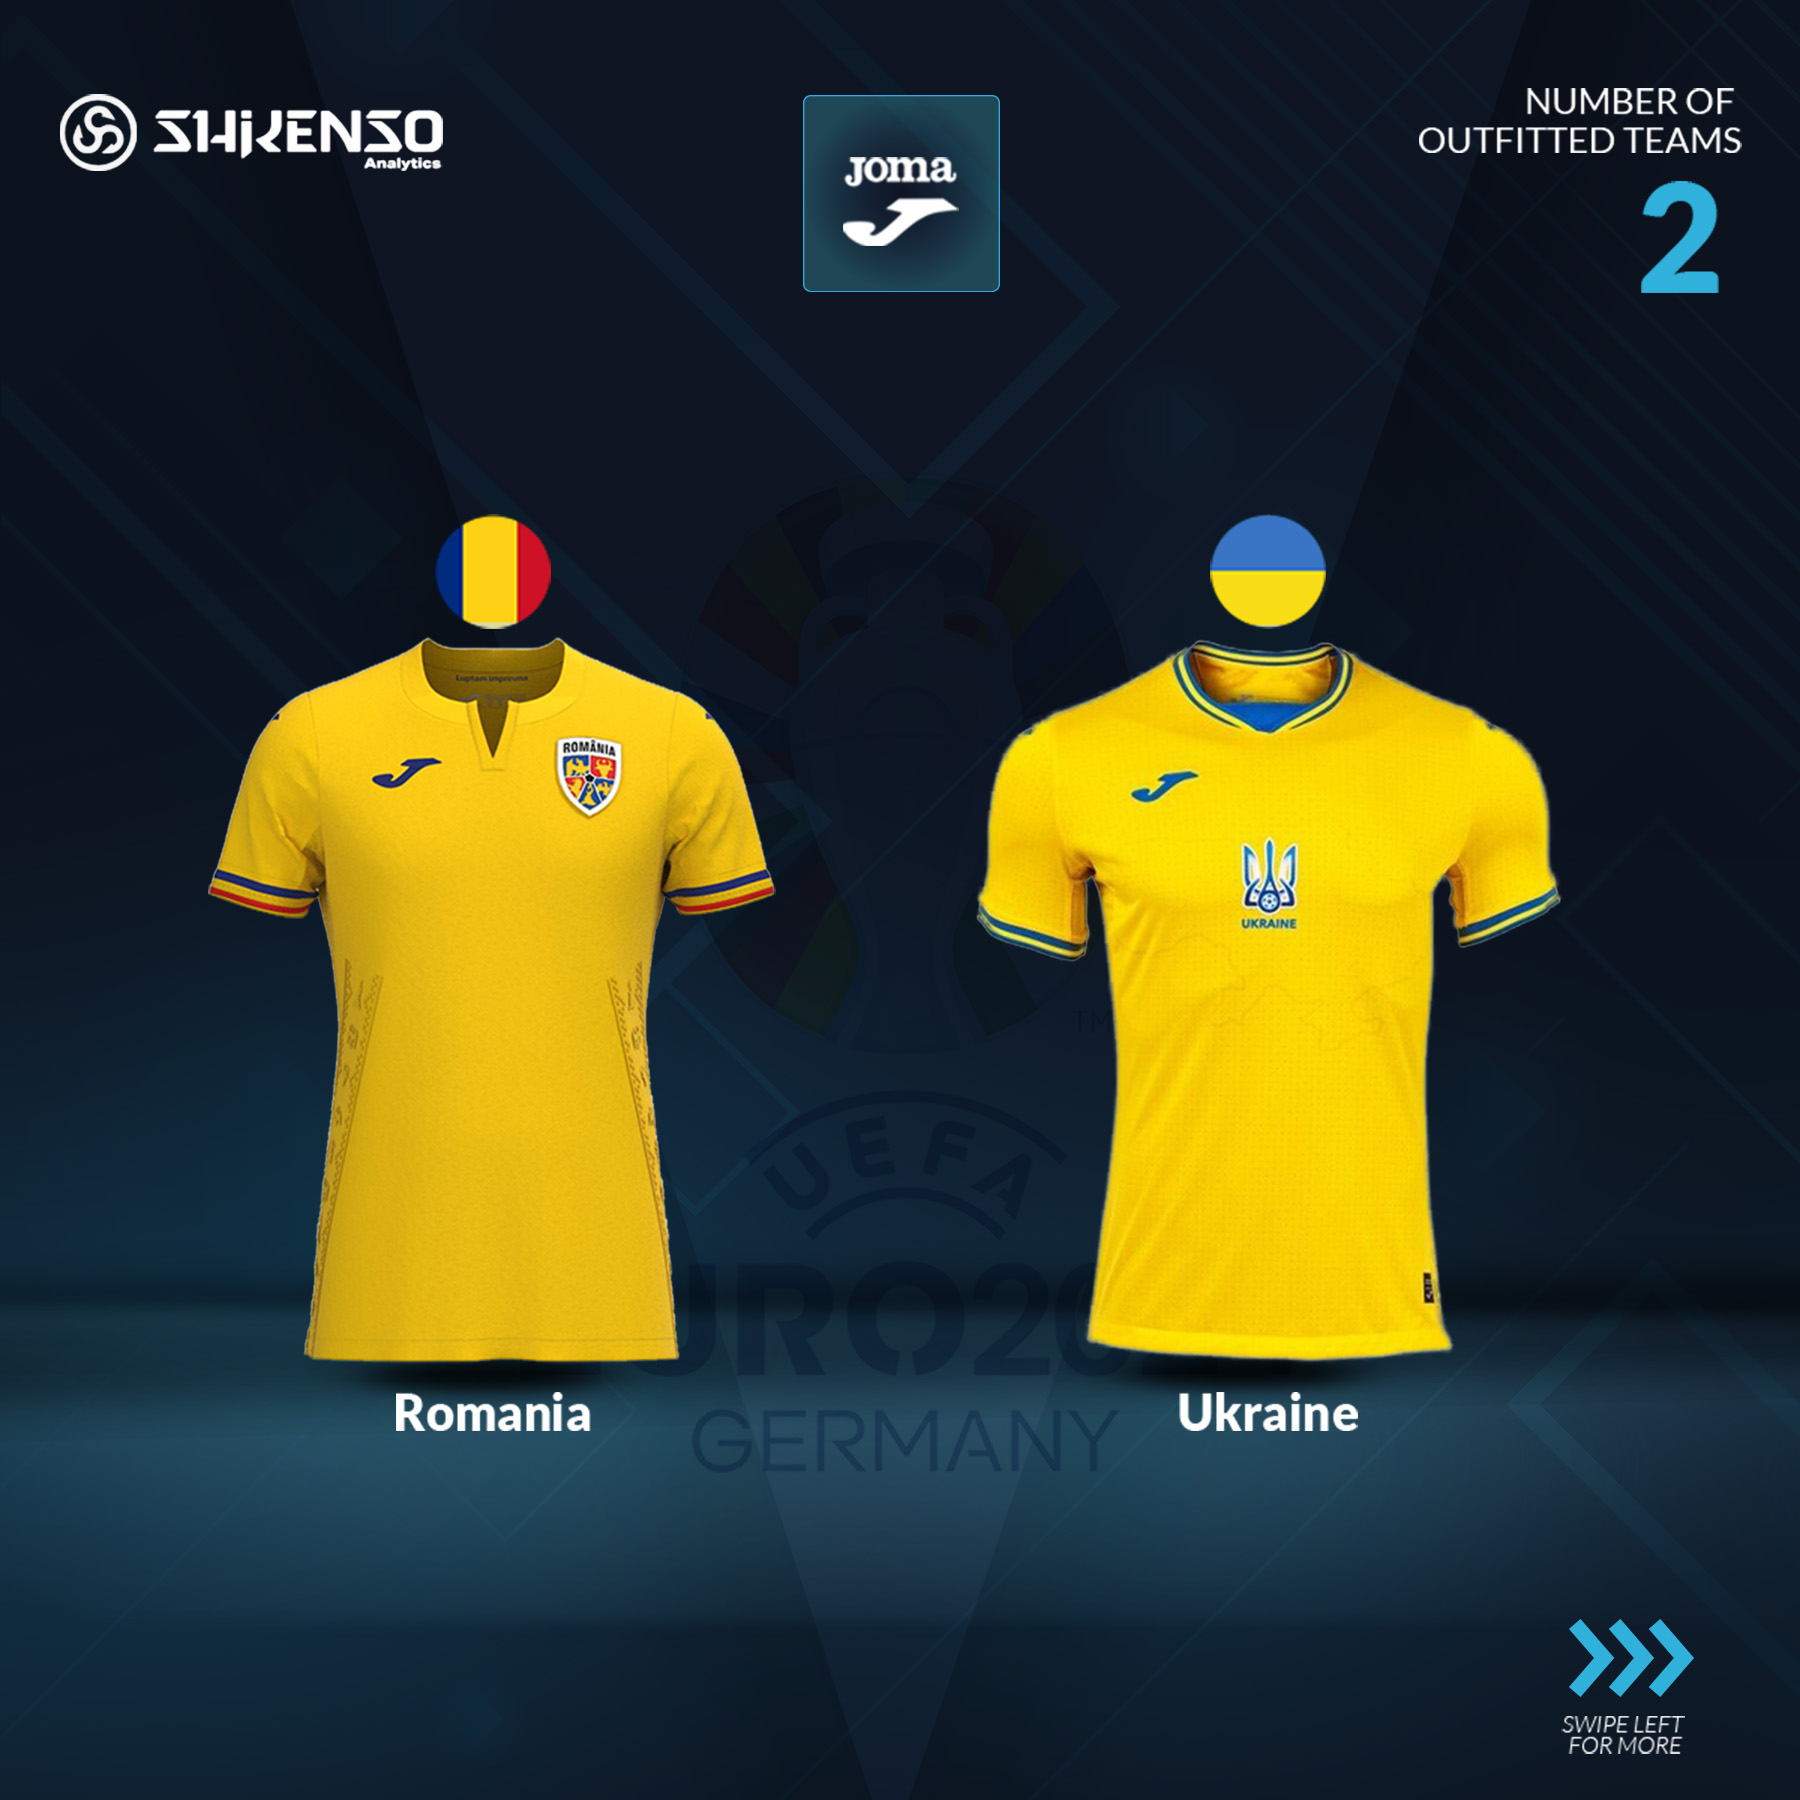 EURO 2024 Joma sponsorships: Graphic illustrating which national teams are outfitted by Joma for the championship.